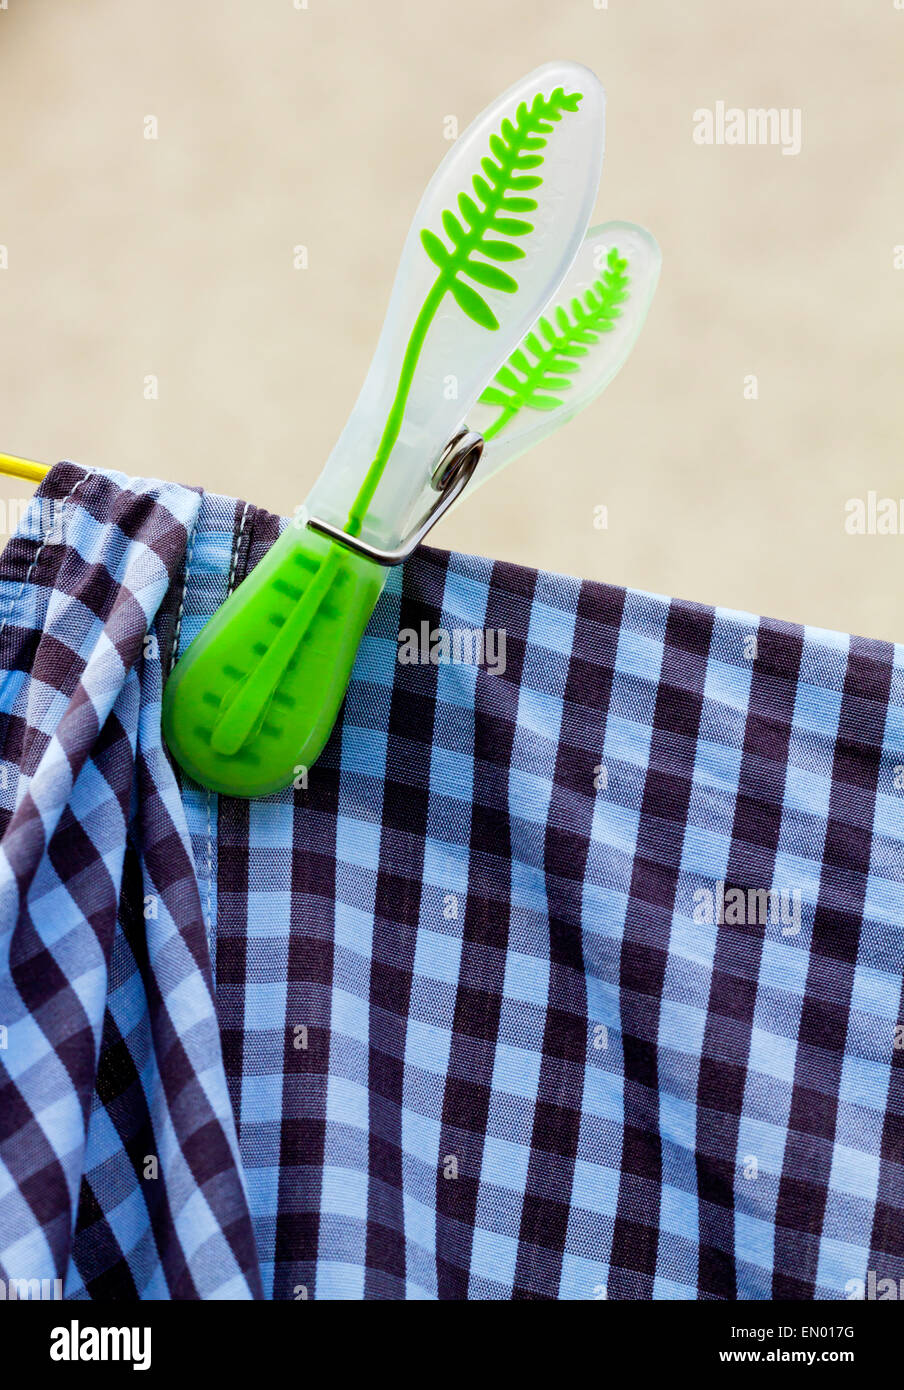 Plastic clothes peg on a washing line with shirt hanging out to dry Stock Photo